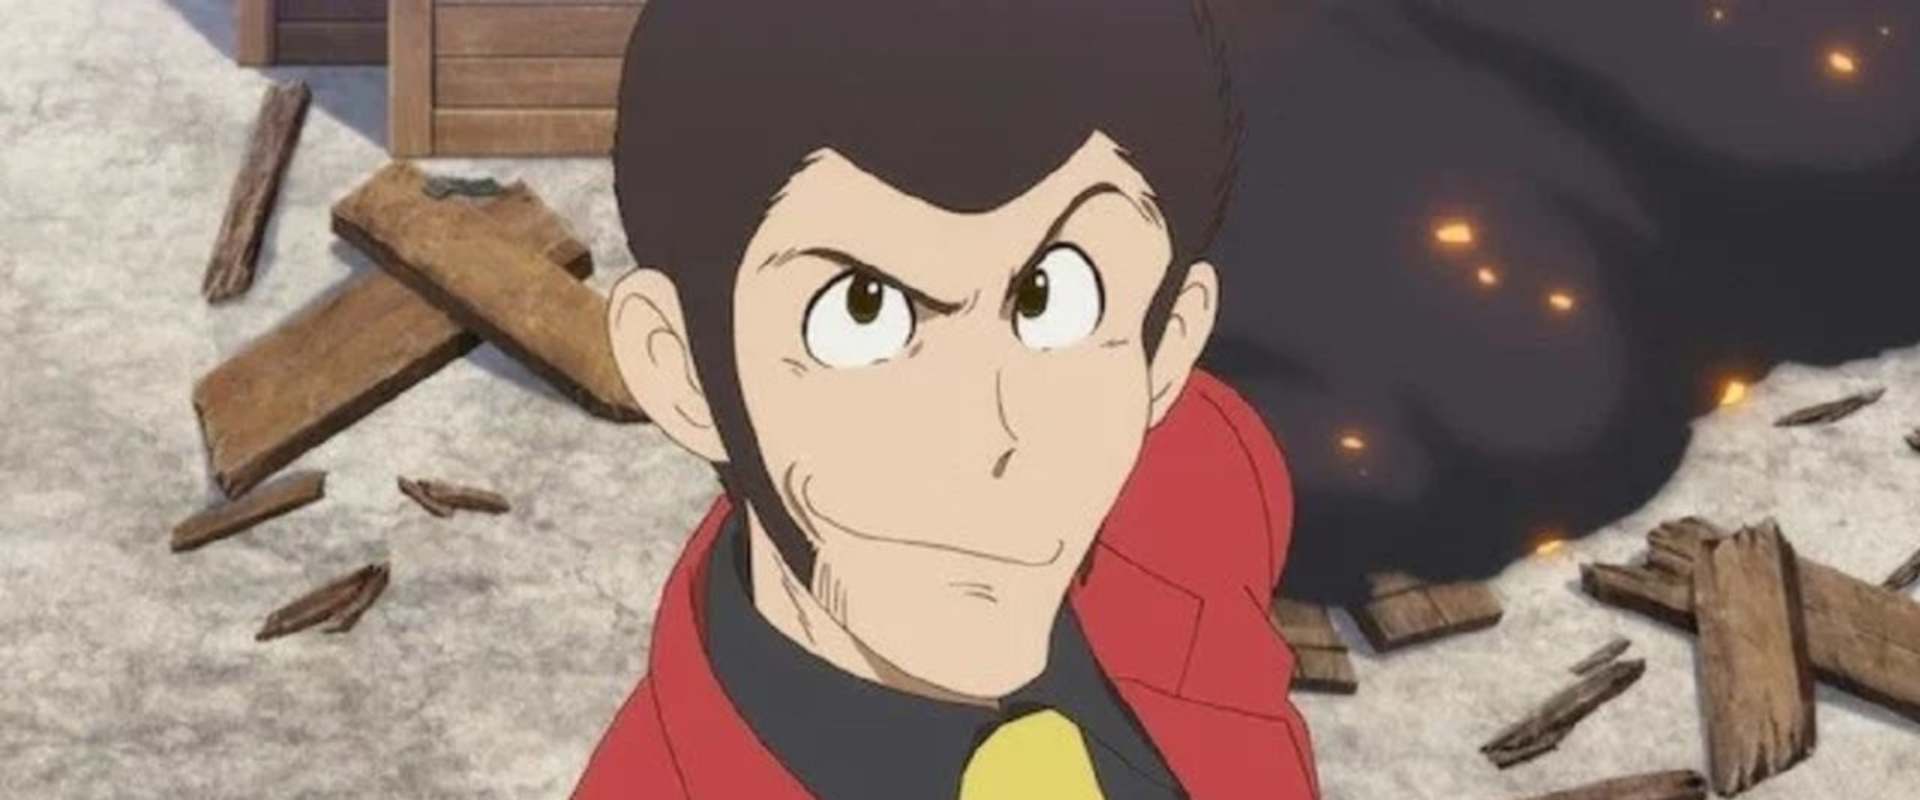 Lupin the Third: Prison of the Past background 2